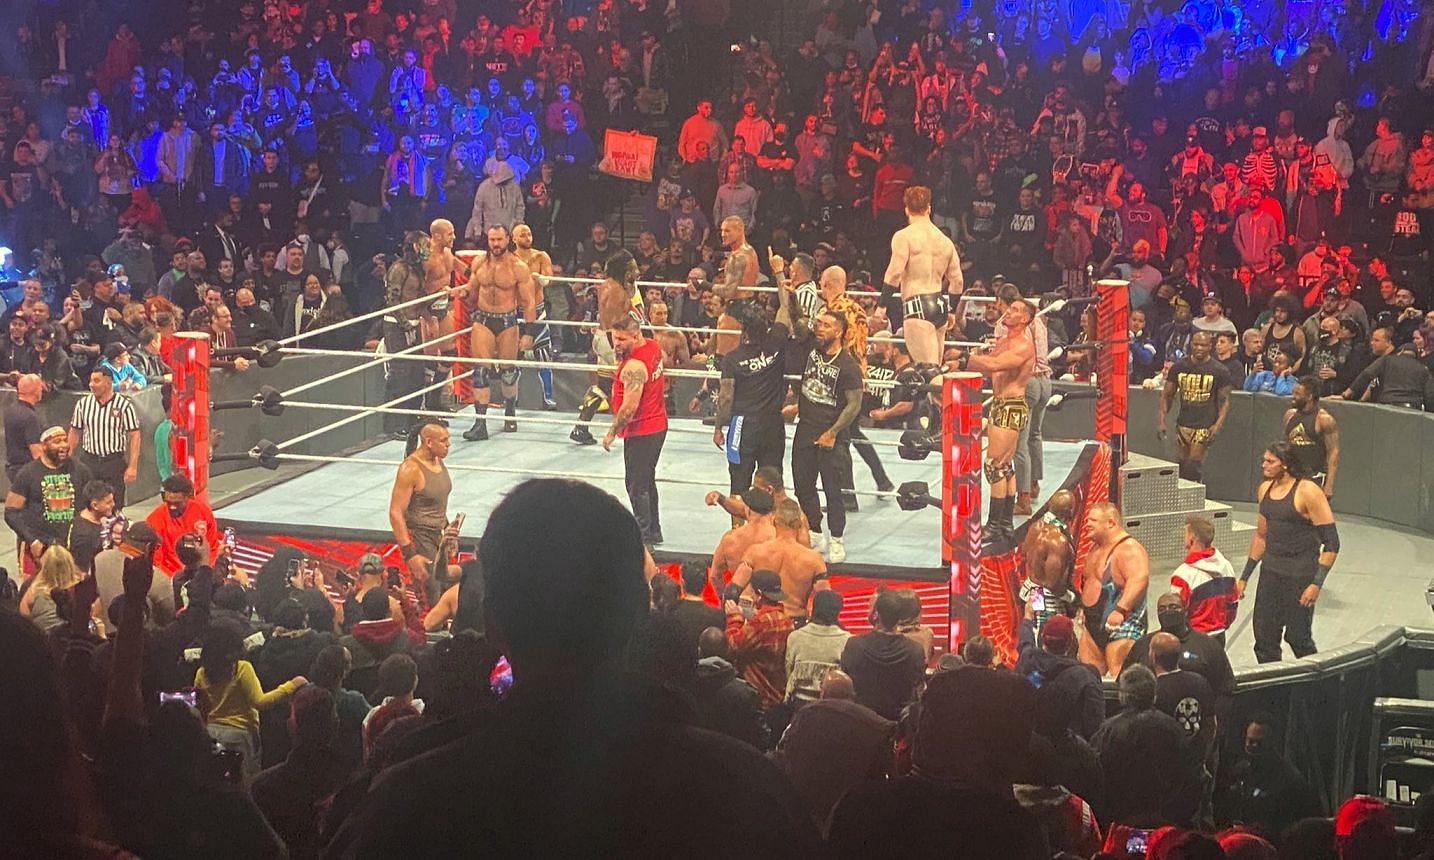 A seven-on-seven lumberjack match took place after RAW went off the air